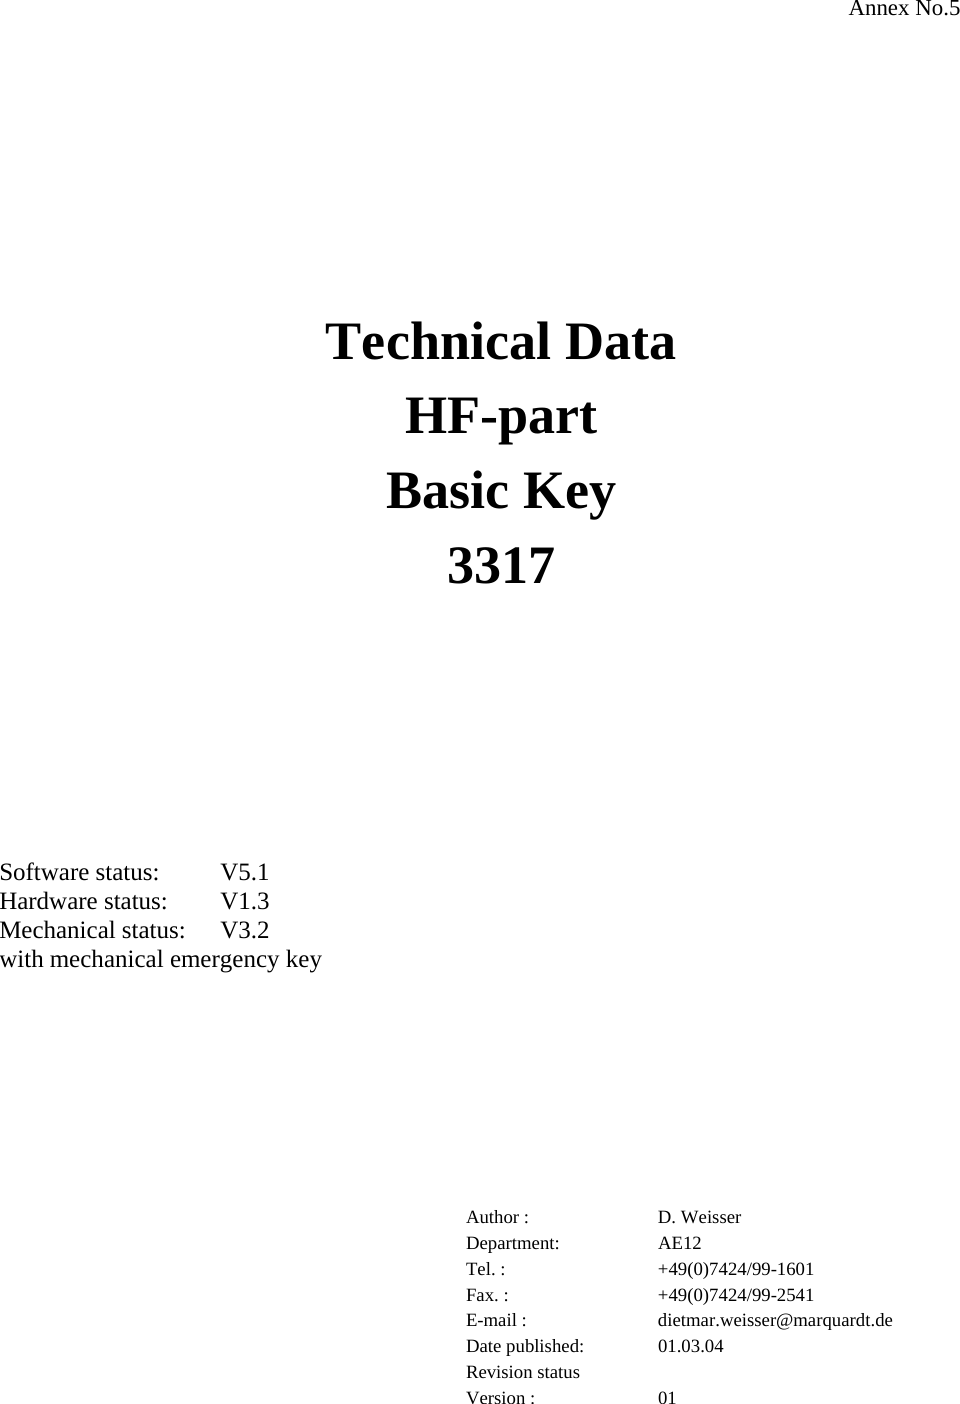 Annex No.5           Technical Data HF-part Basic Key 3317       Software status:  V5.1 Hardware status:  V1.3 Mechanical status:  V3.2 with mechanical emergency key         Author :  D. Weisser Department: AE12 Tel. :  +49(0)7424/99-1601 Fax. :  +49(0)7424/99-2541 E-mail :  dietmar.weisser@marquardt.de Date published:  01.03.04 Revision status    Version :  01 